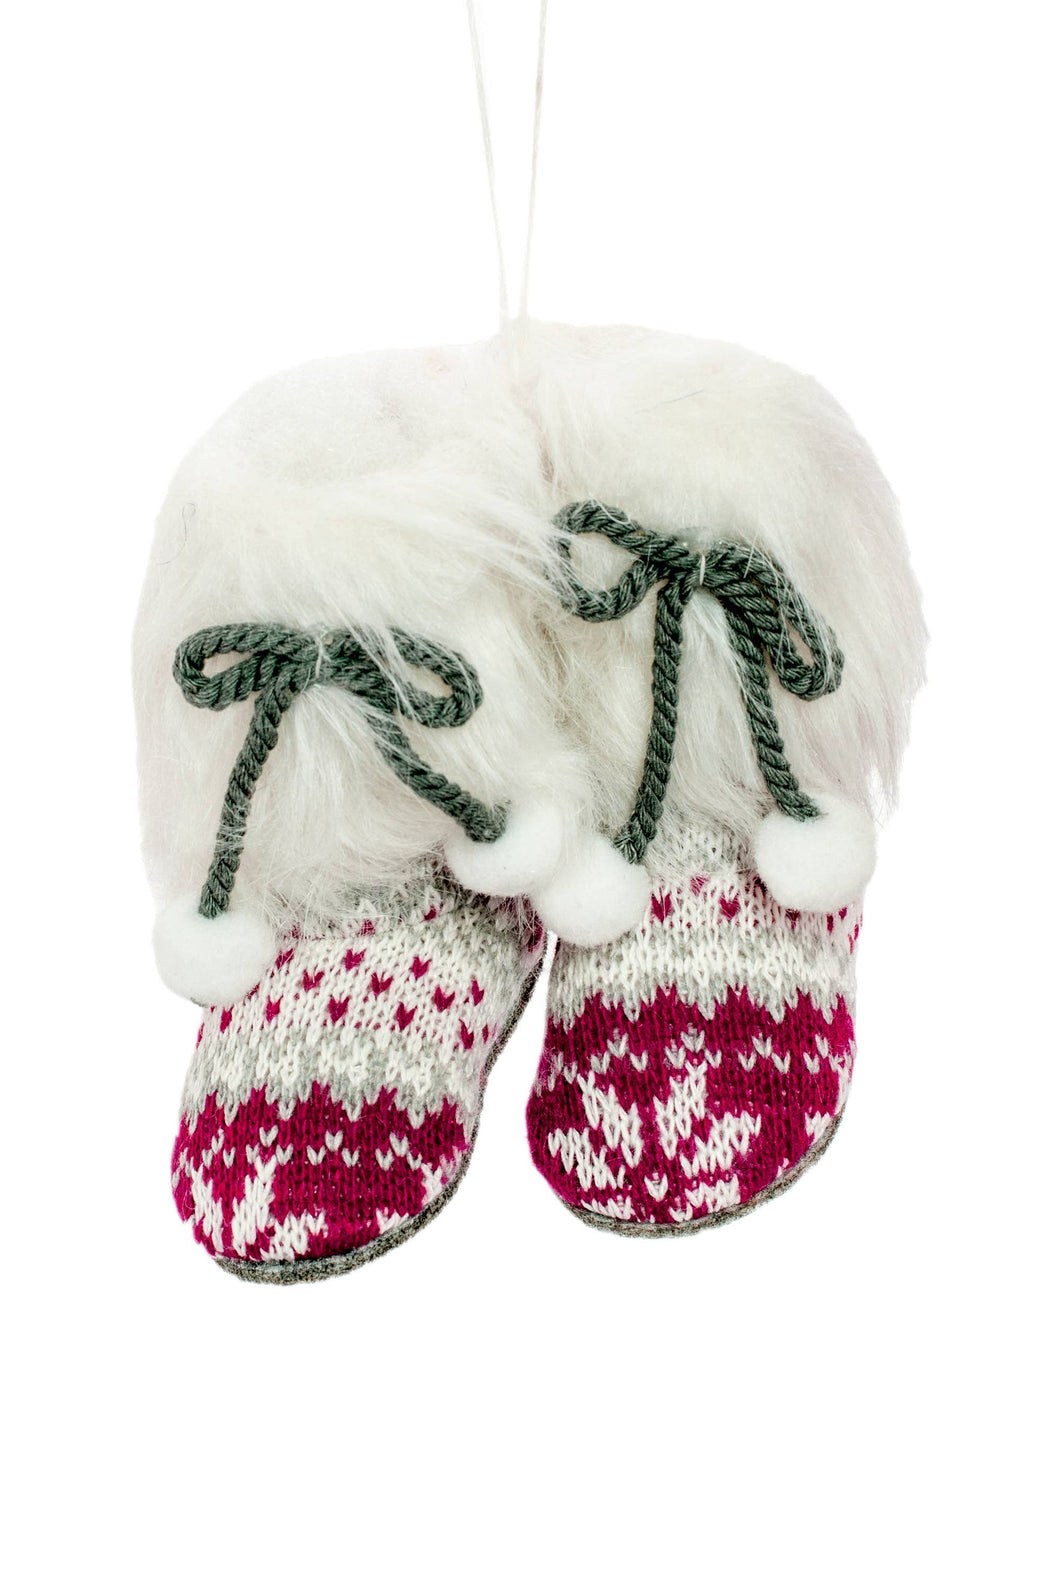 Red Hanging Snowboots Ornament